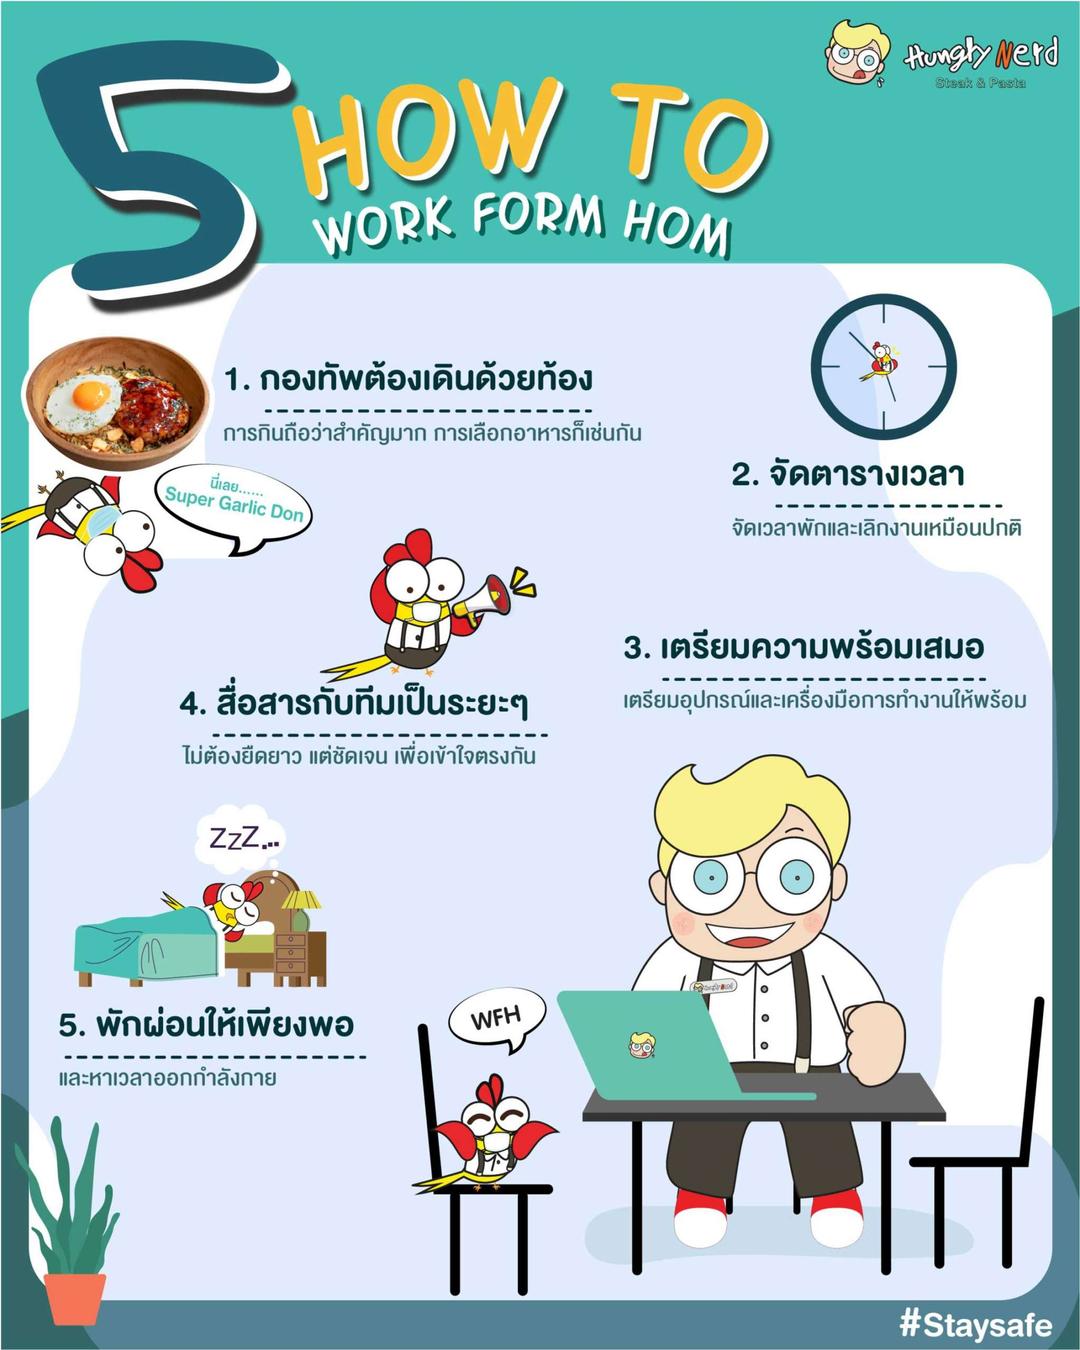 How To Work Form Home